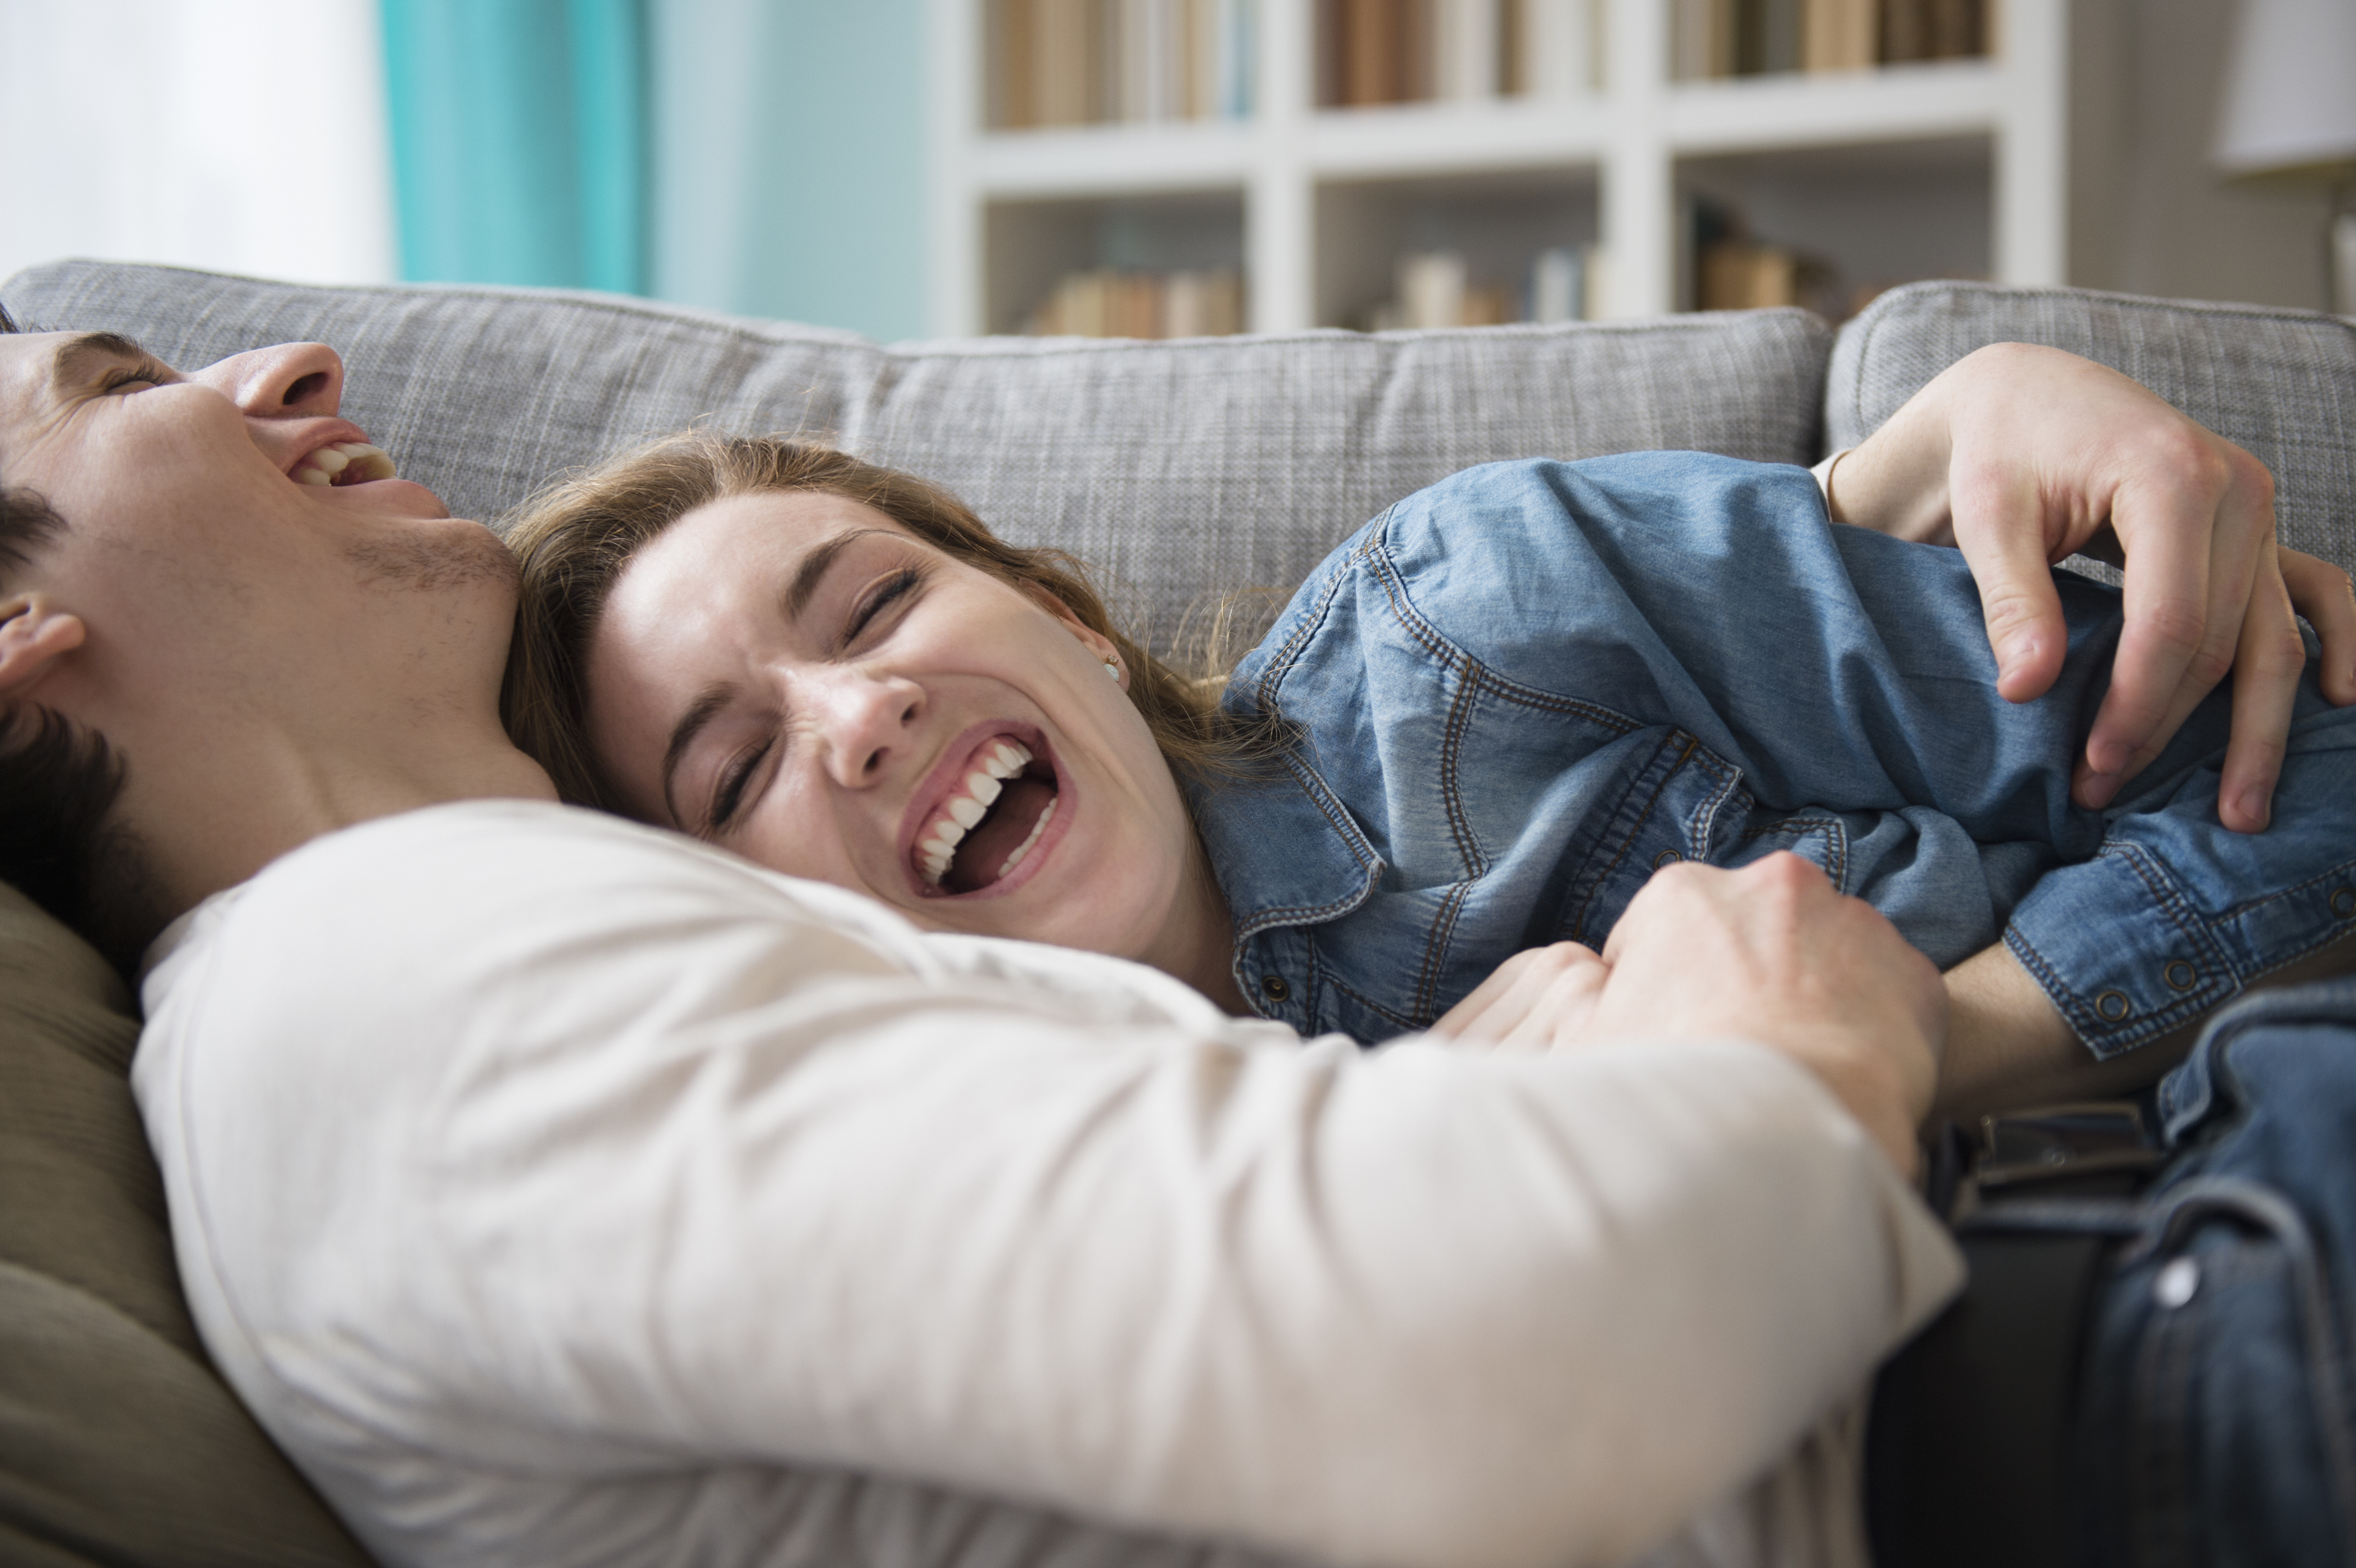 Couple laughing together on couch | Source: Getty Images